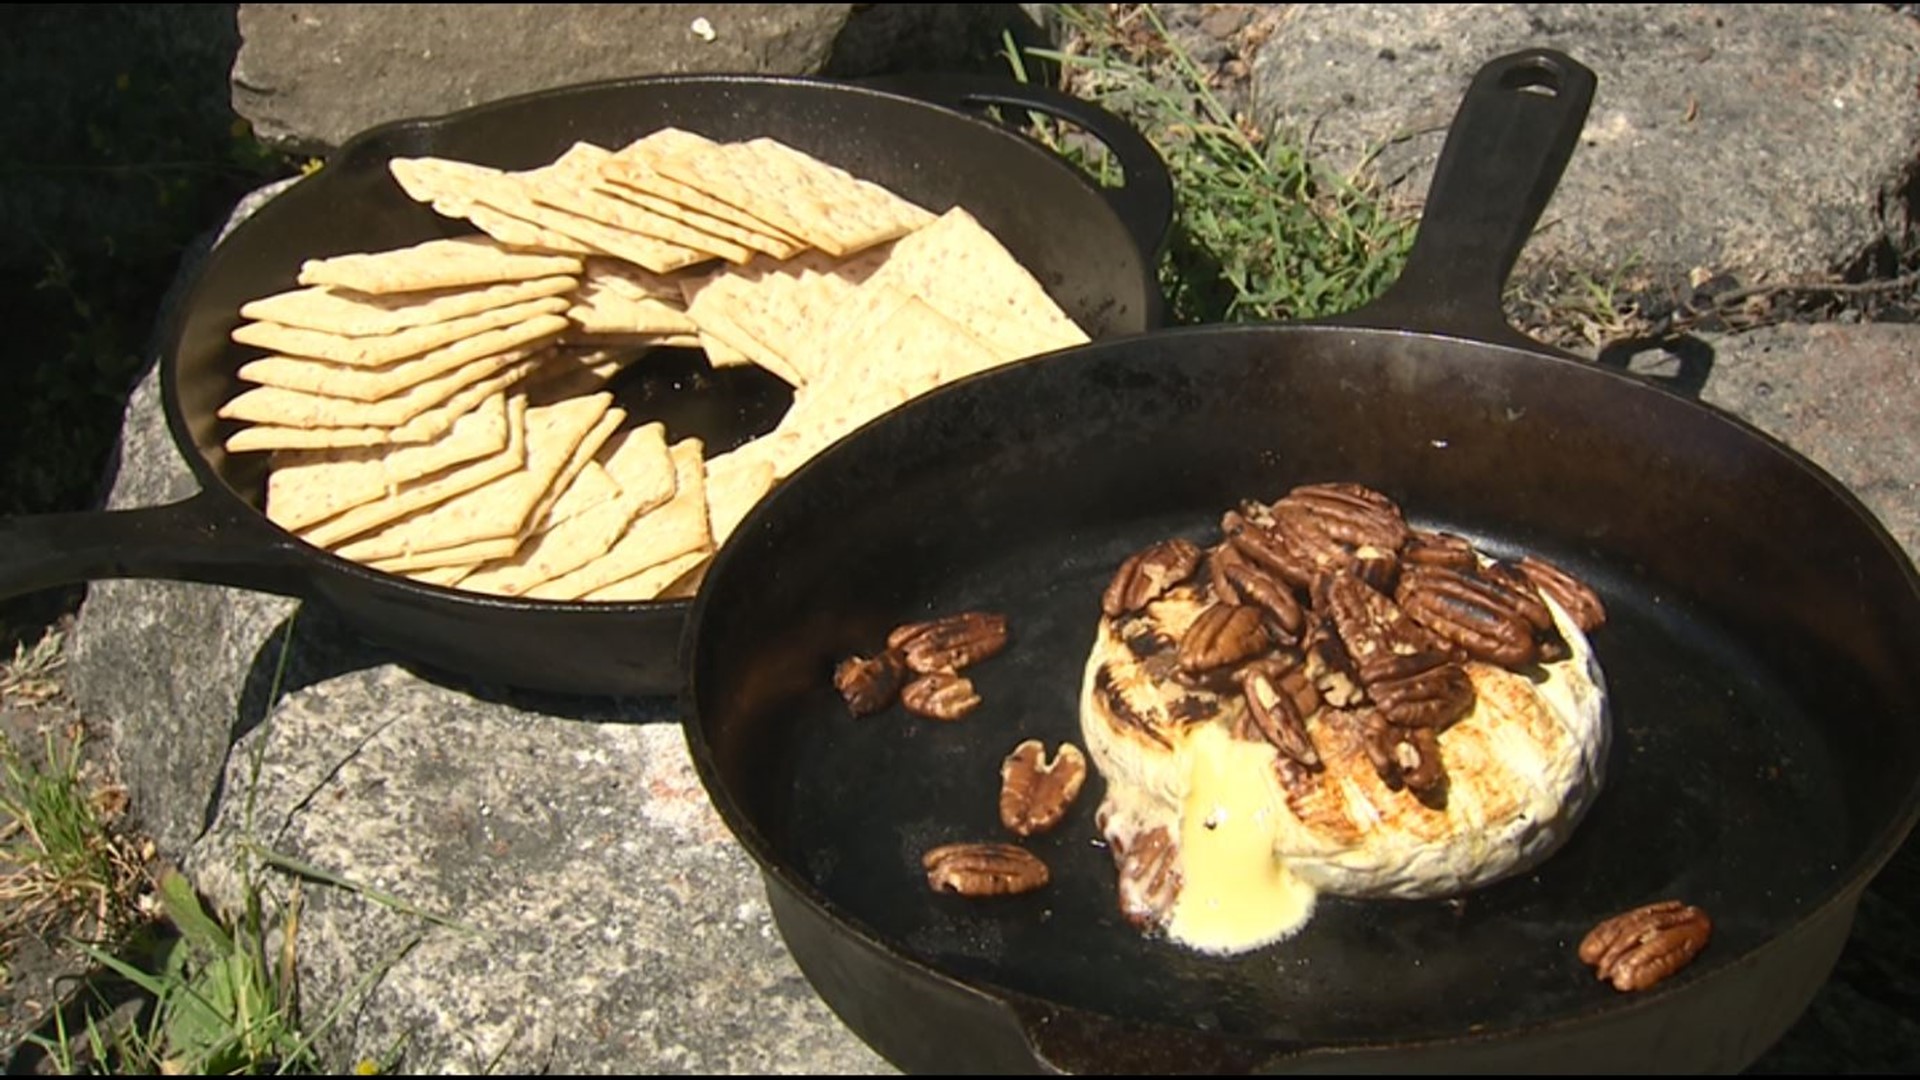 Go gourmet in the great outdoors: baked brie you can make at your campsite.